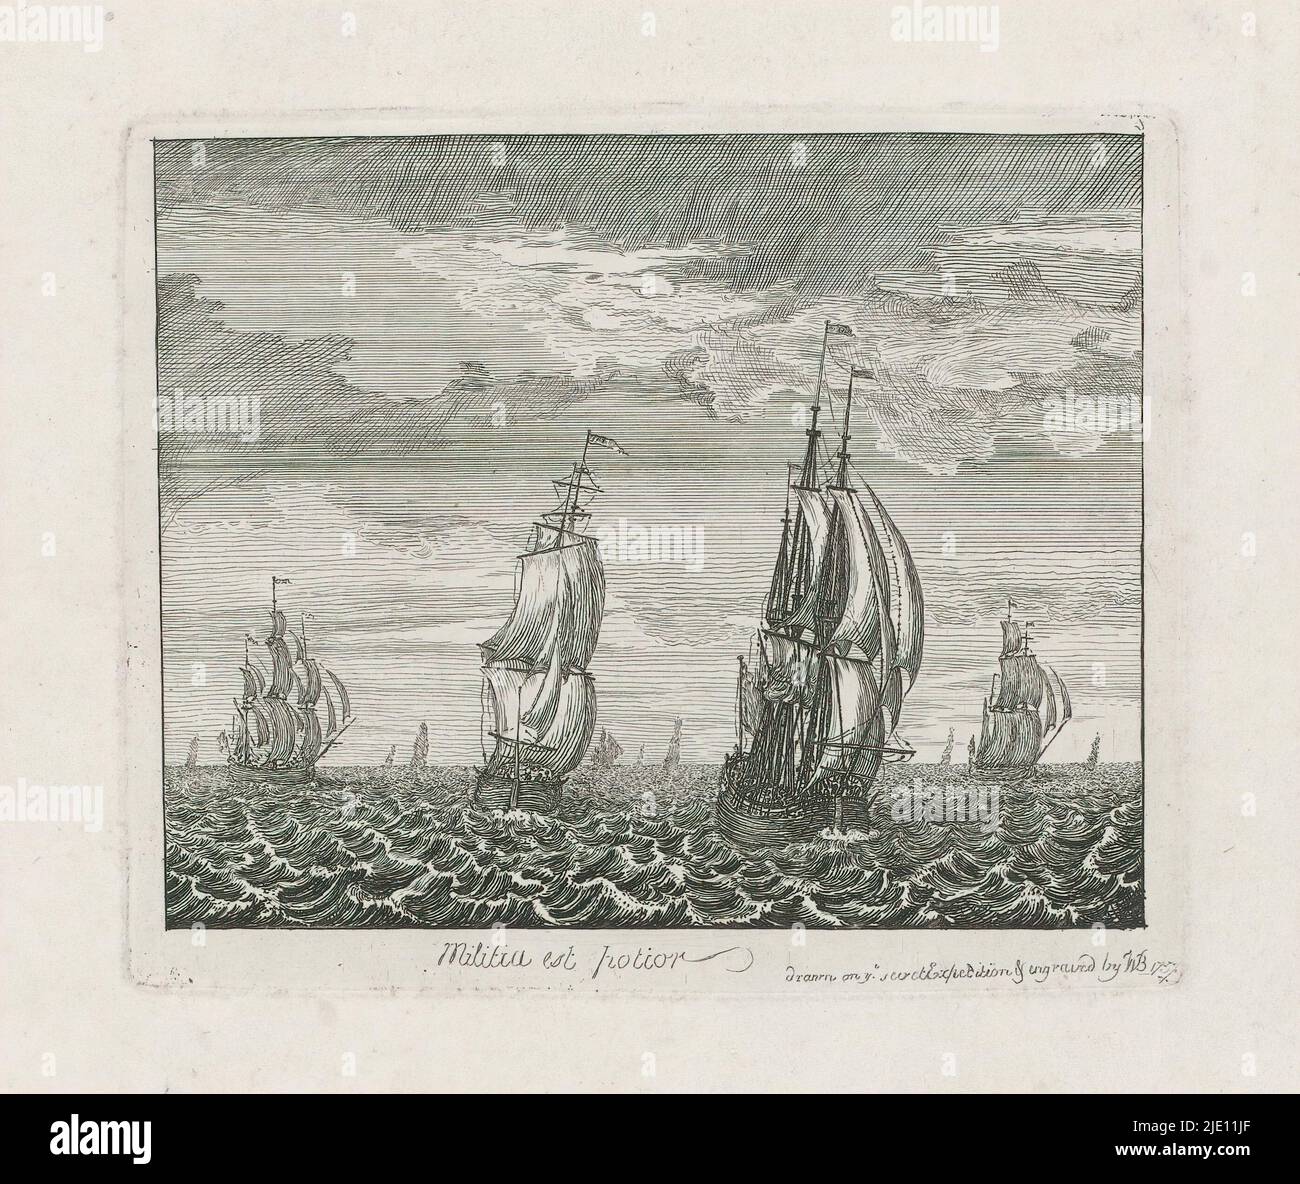 Sailing ships on the high seas, Militia est potior (title on object), Sea with two large sailing ships in the foreground seen from behind. Print signed by William Baillie with addition: 'drawn on a secret Expedition & engraved by WB 1757'., print maker: William Baillie, (mentioned on object), after drawing by: William Baillie, (mentioned on object), 1757, paper, etching, height 124 mm × width 152 mm Stock Photo